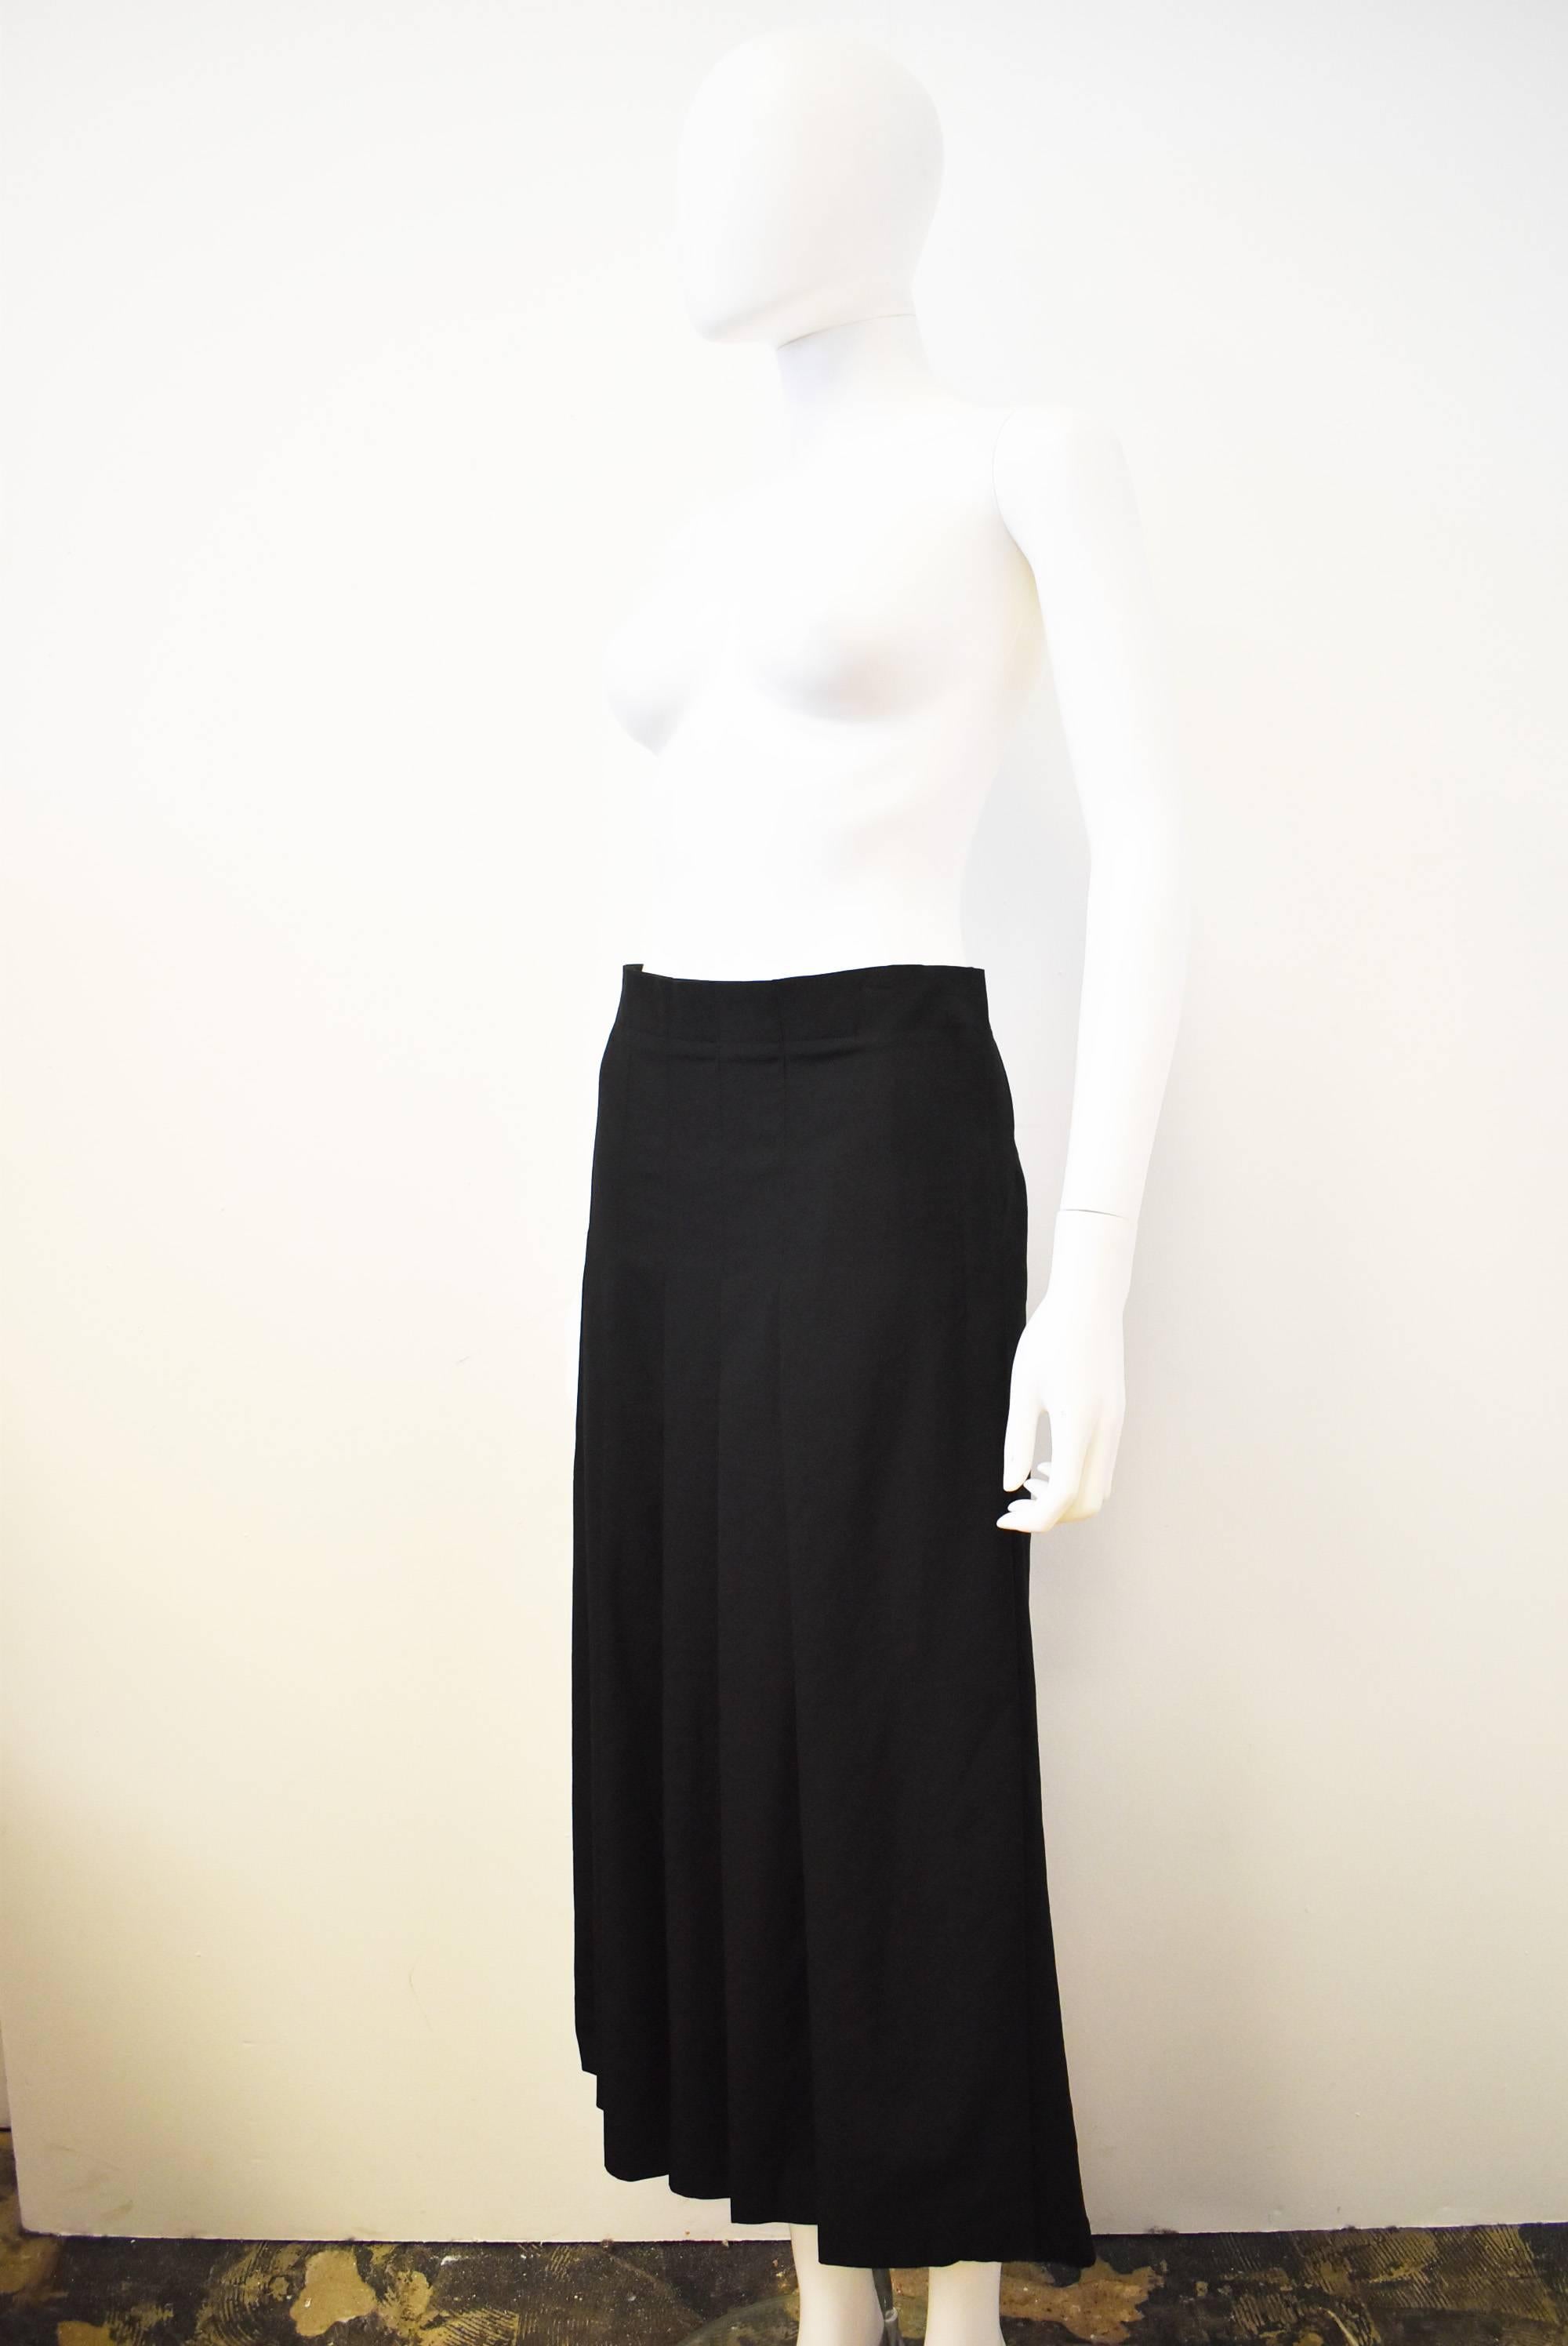 A simple black skirt from Y’s by Yohji Yamamoto. The skirt has an ankle length A-line shape with a pleated front panel that attaches with a zip fastening at the side. 
The skirt is a Japanese size 3 but comes up quite small. Please see the